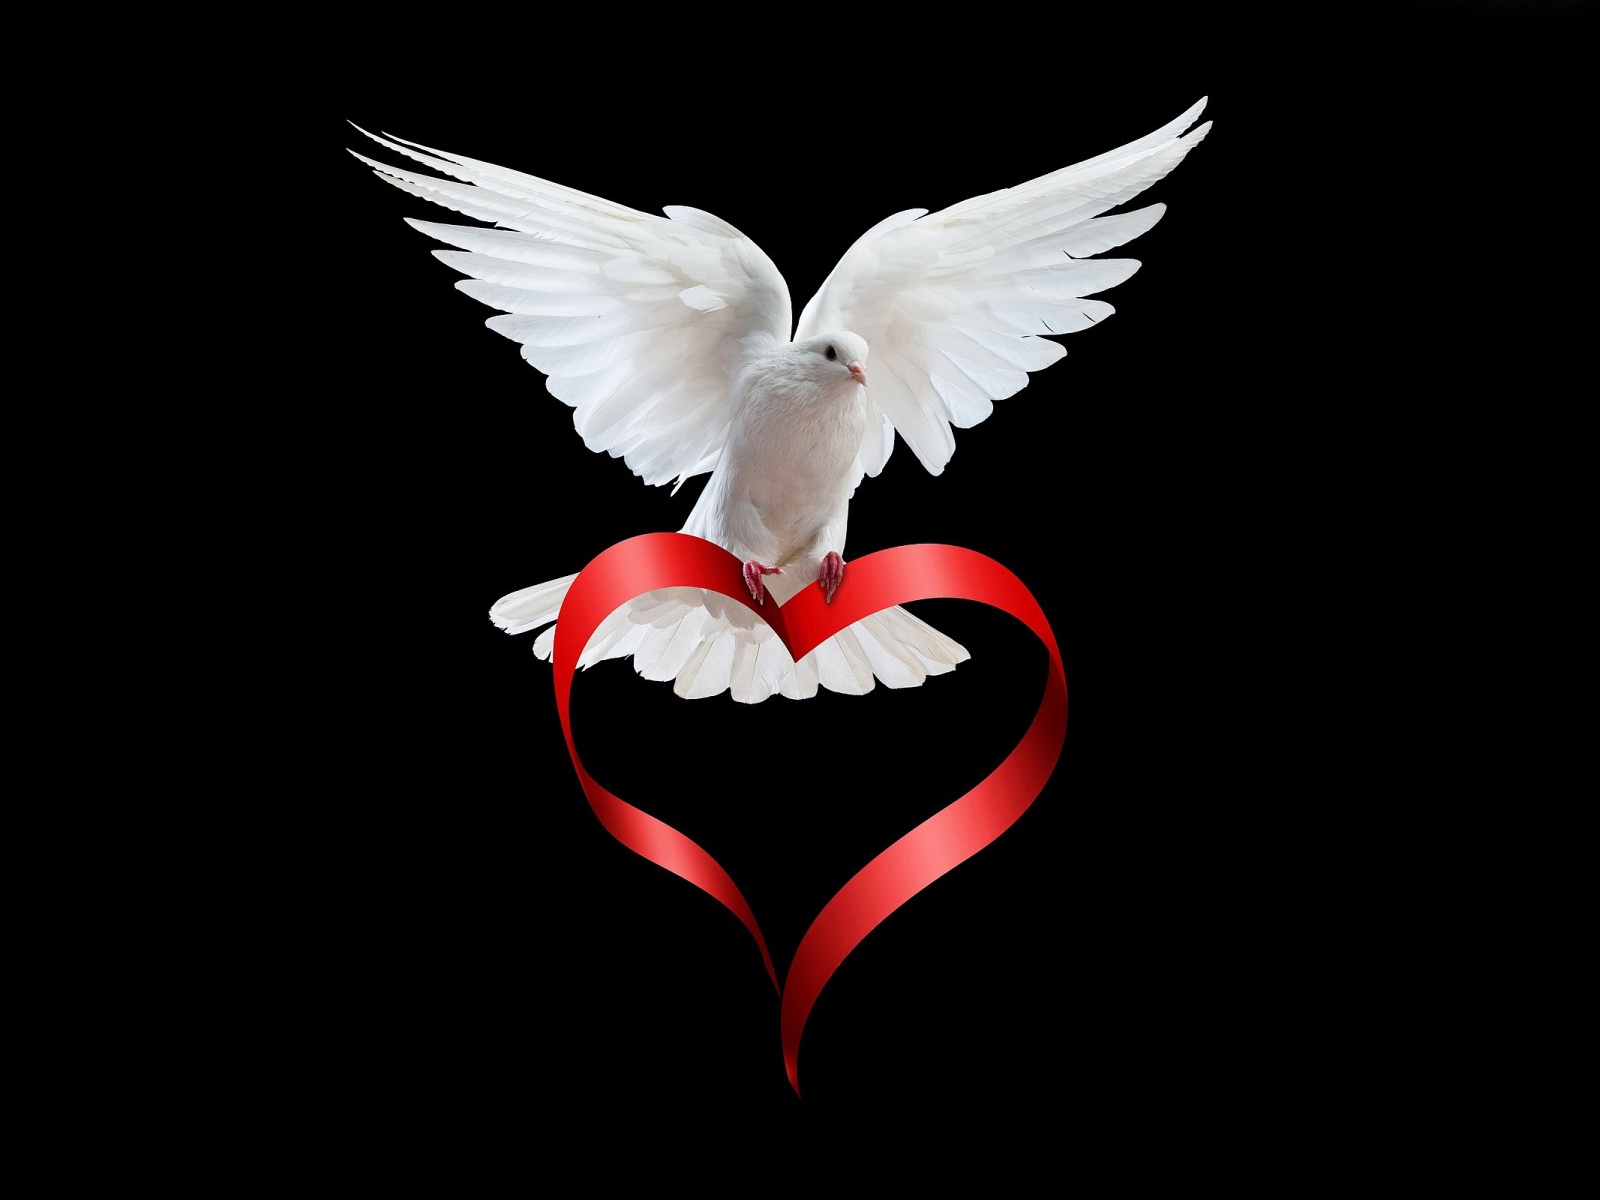 Doves images Dove HD wallpaper and background photos 1600x1200